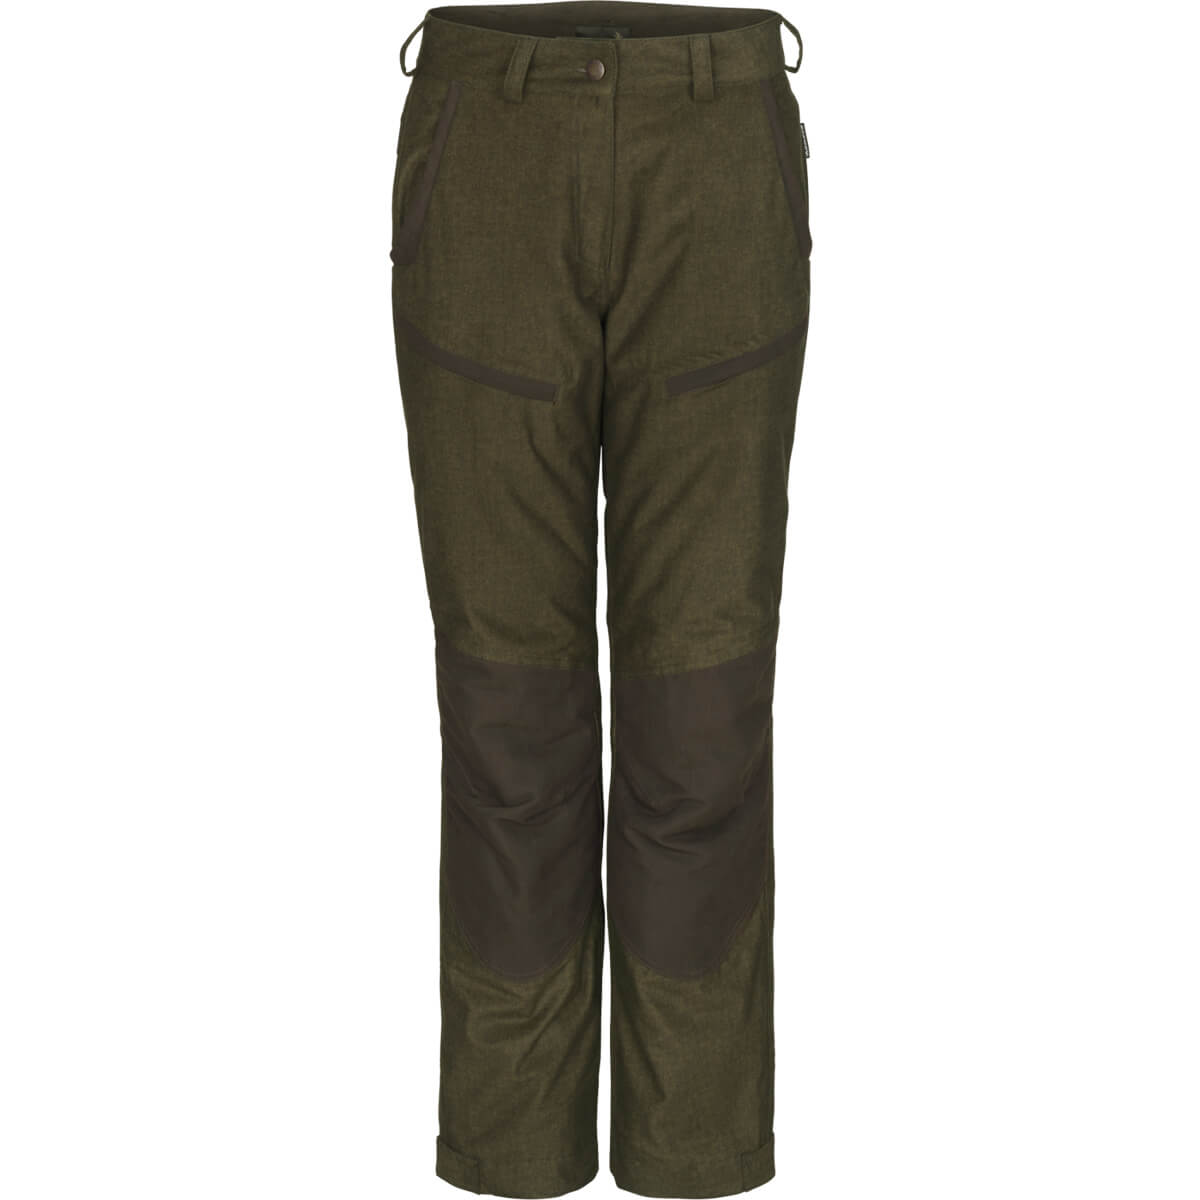 Seeland Trousers Lady North - Hunting Trousers